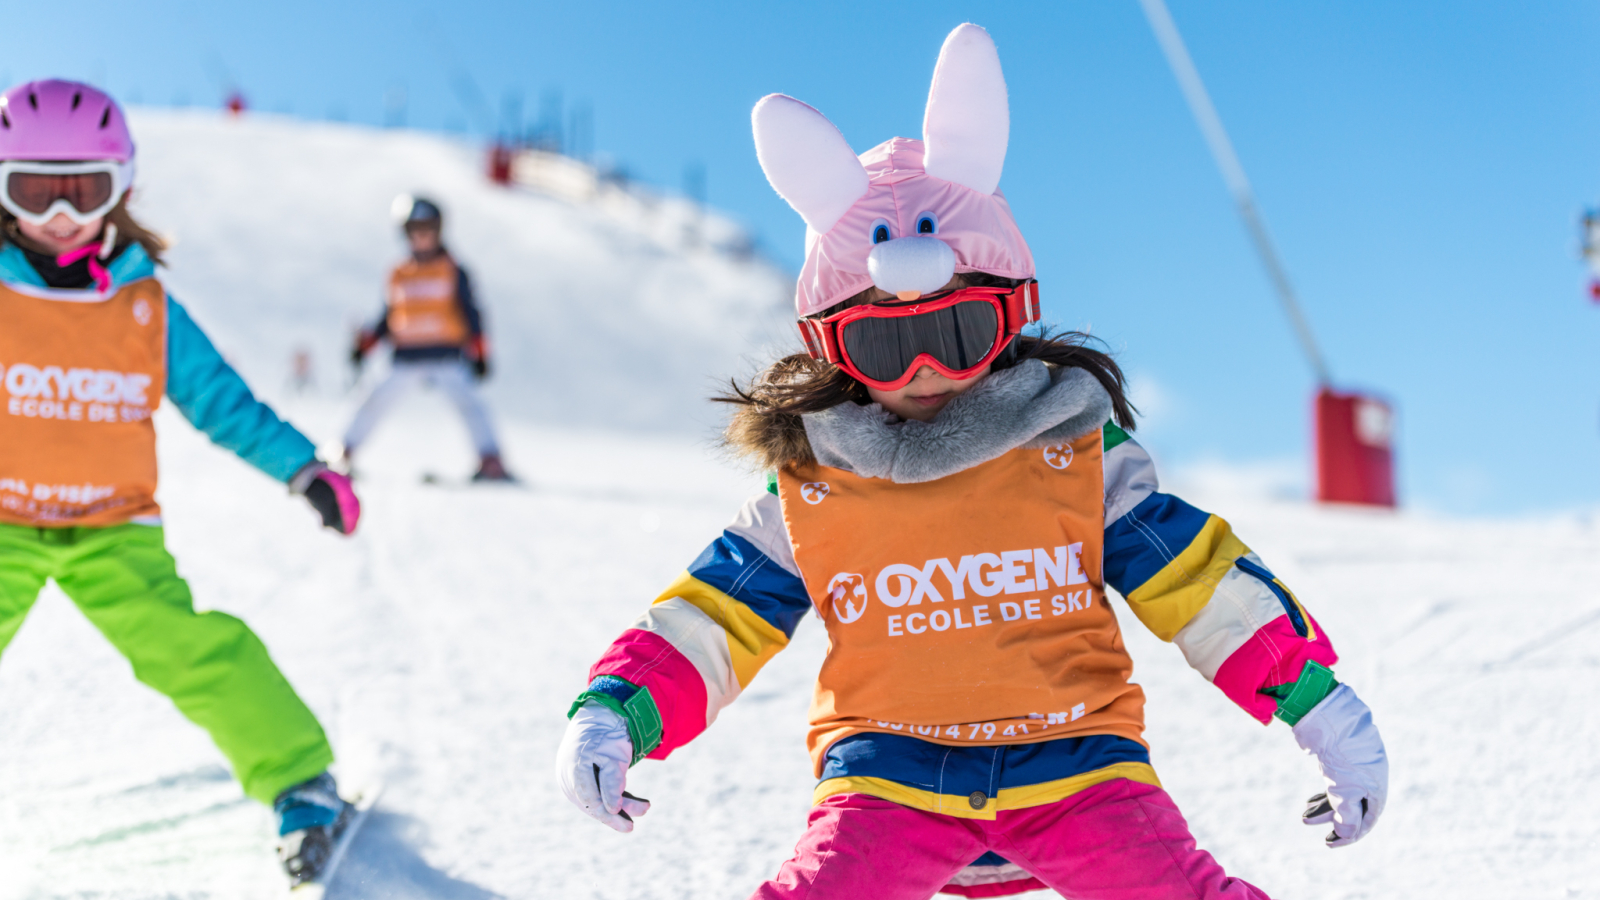 Ski lessons are centred around fun games and activities and are limited to 10 participants per instructor.